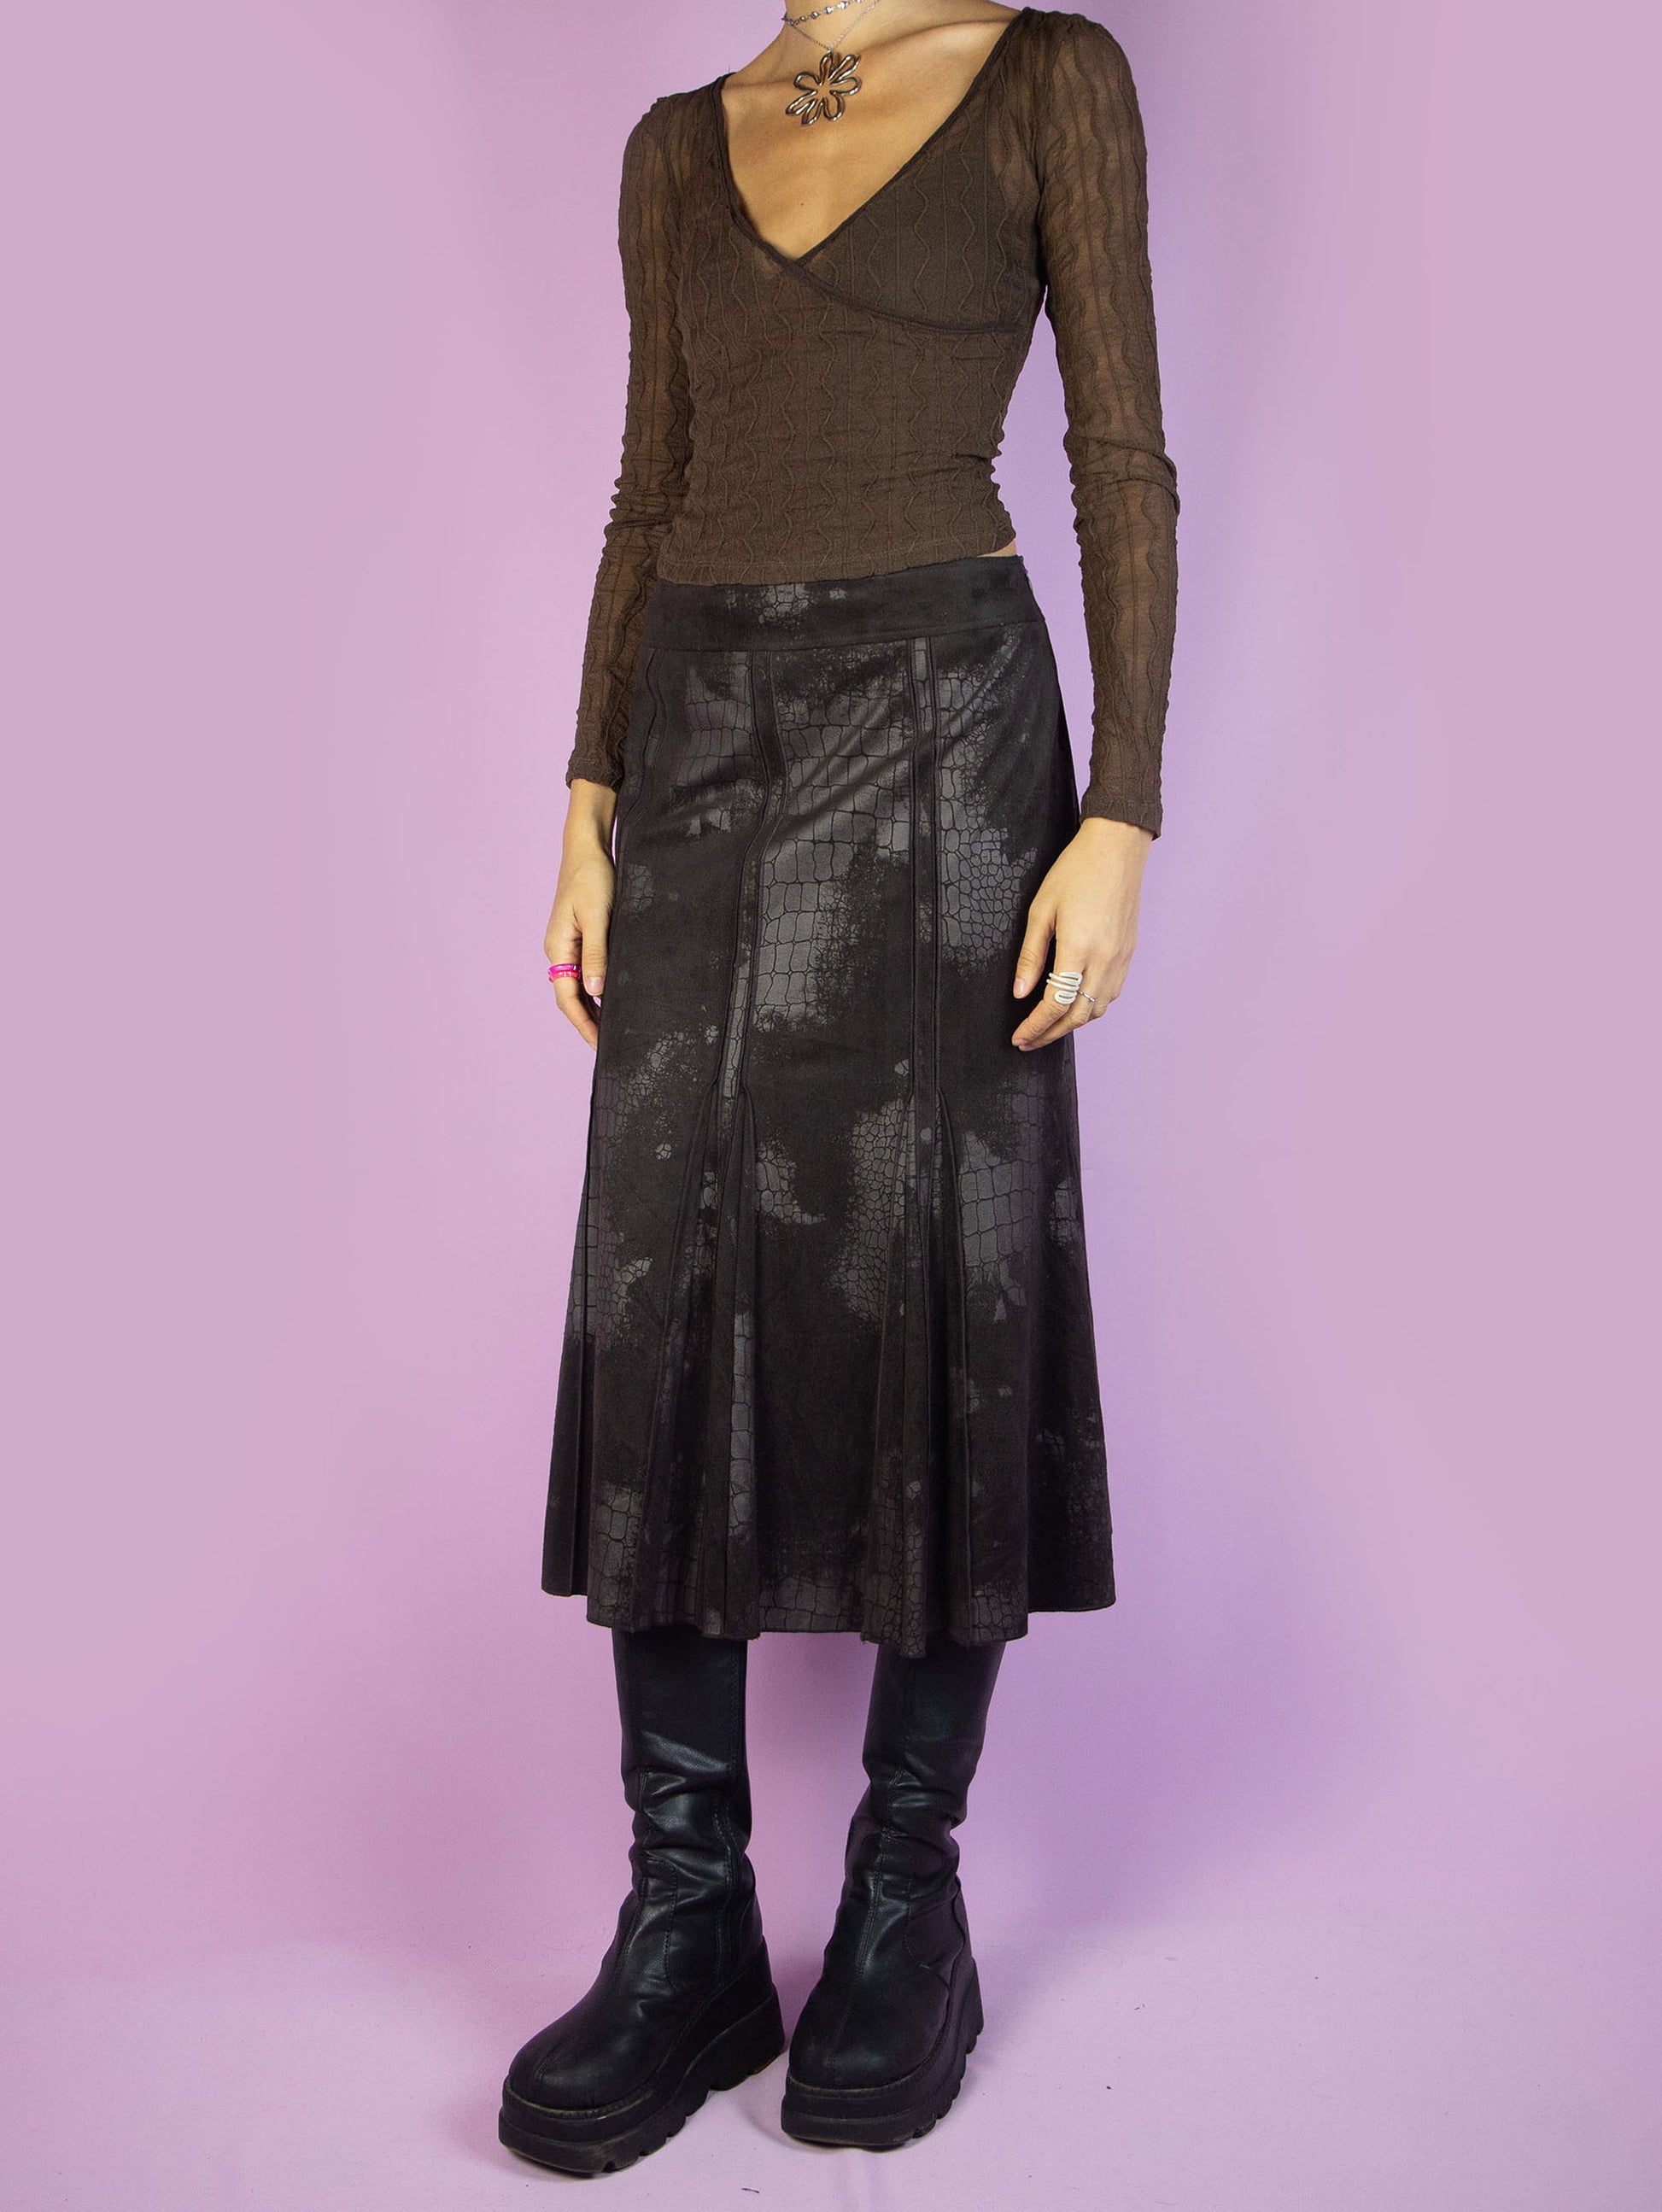 The Y2K Dark Brown Midi Skirt is a vintage 2000s elegant minimalist faux suede animal print pattern trumpet maxi skirt with a side zipper closure. Excellent vintage condition.